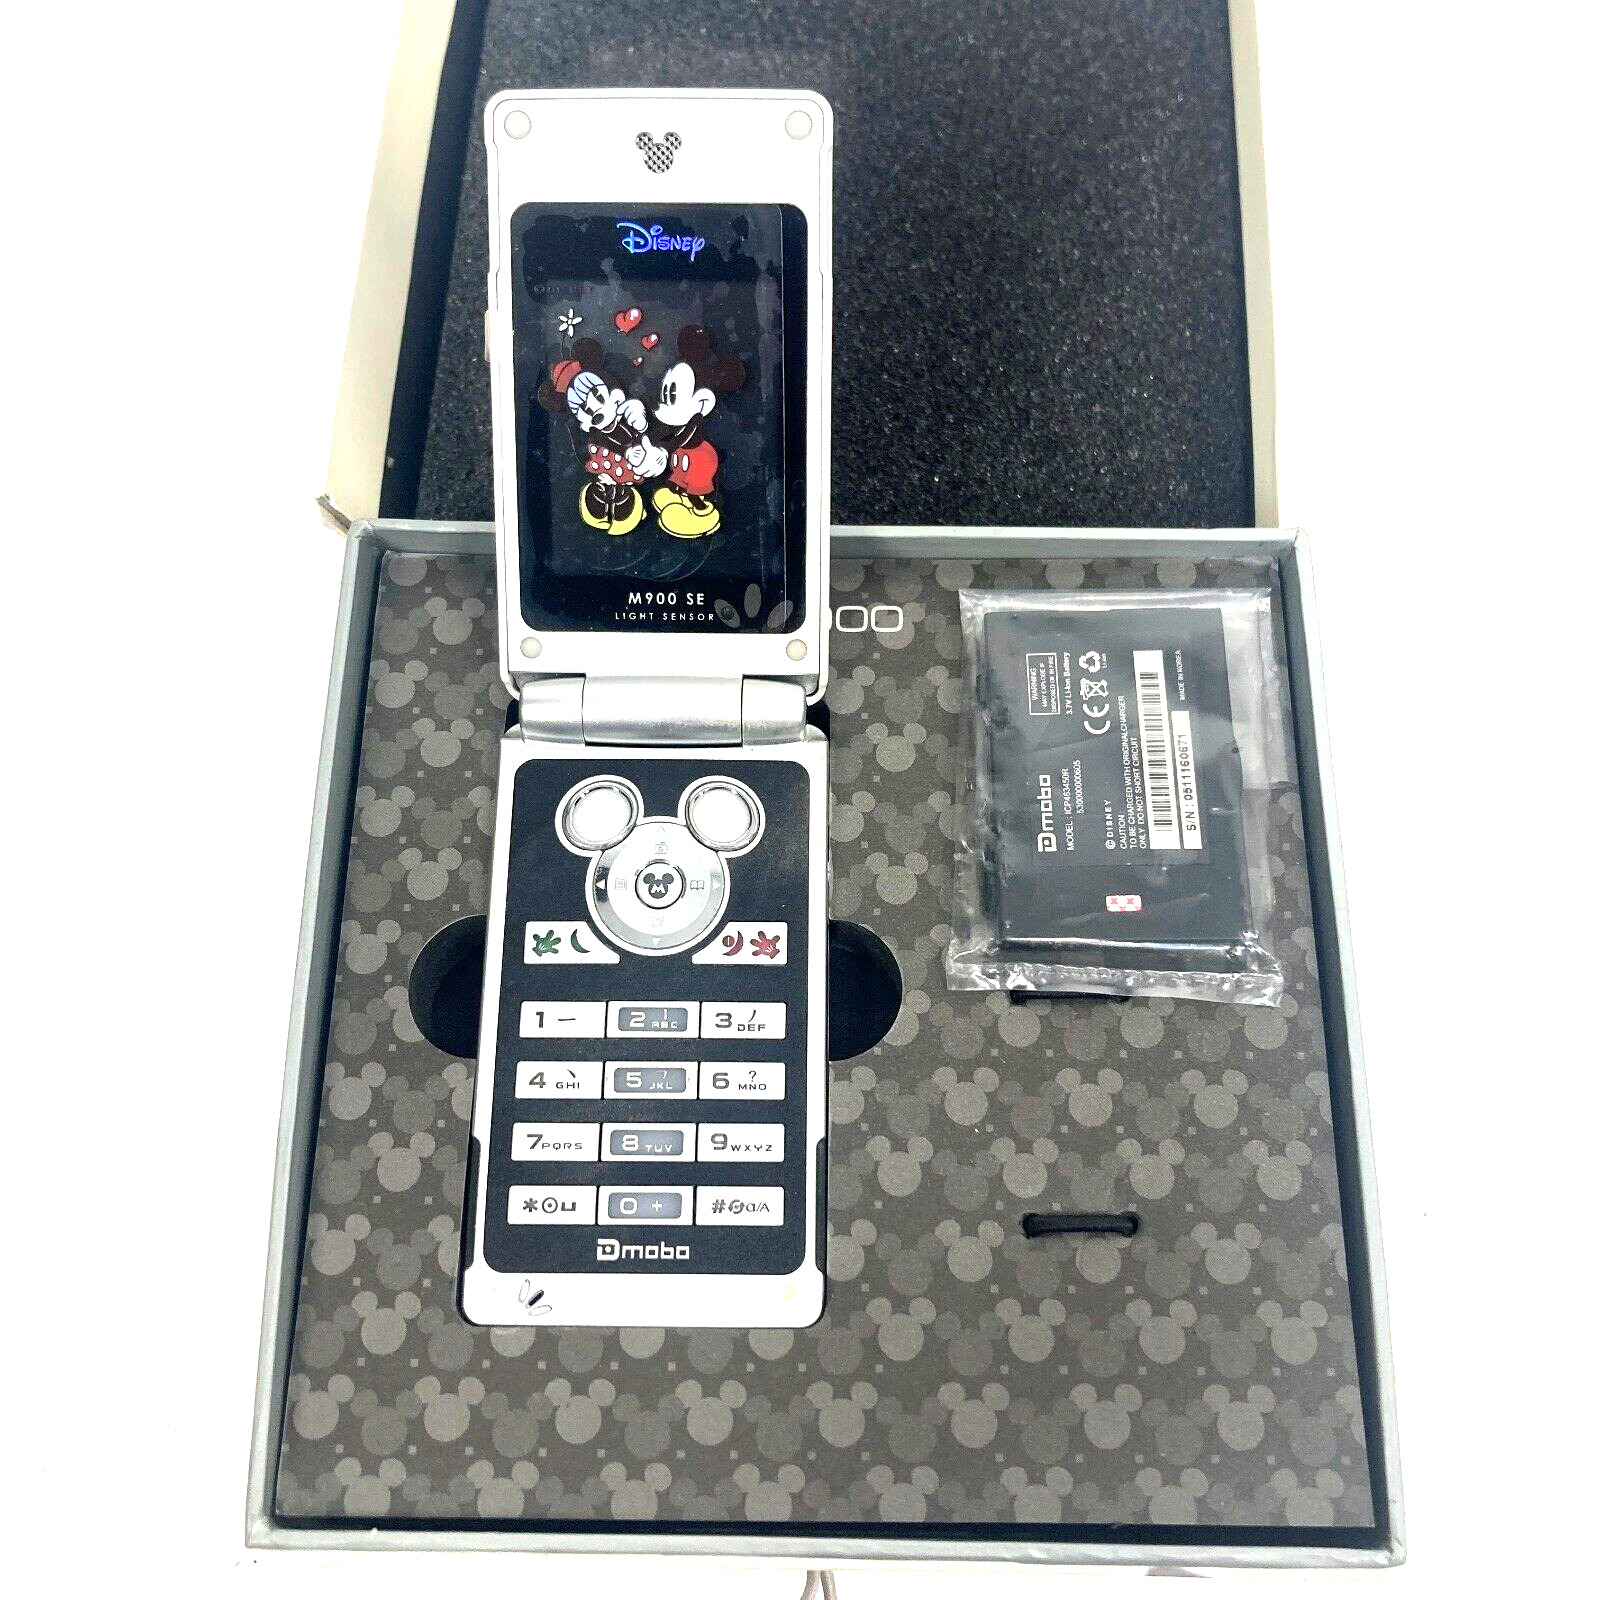 VERY RARE Dmobo Disney 2005 Mobile Mickey Mouse M900 Cell Phone & Box Open Box